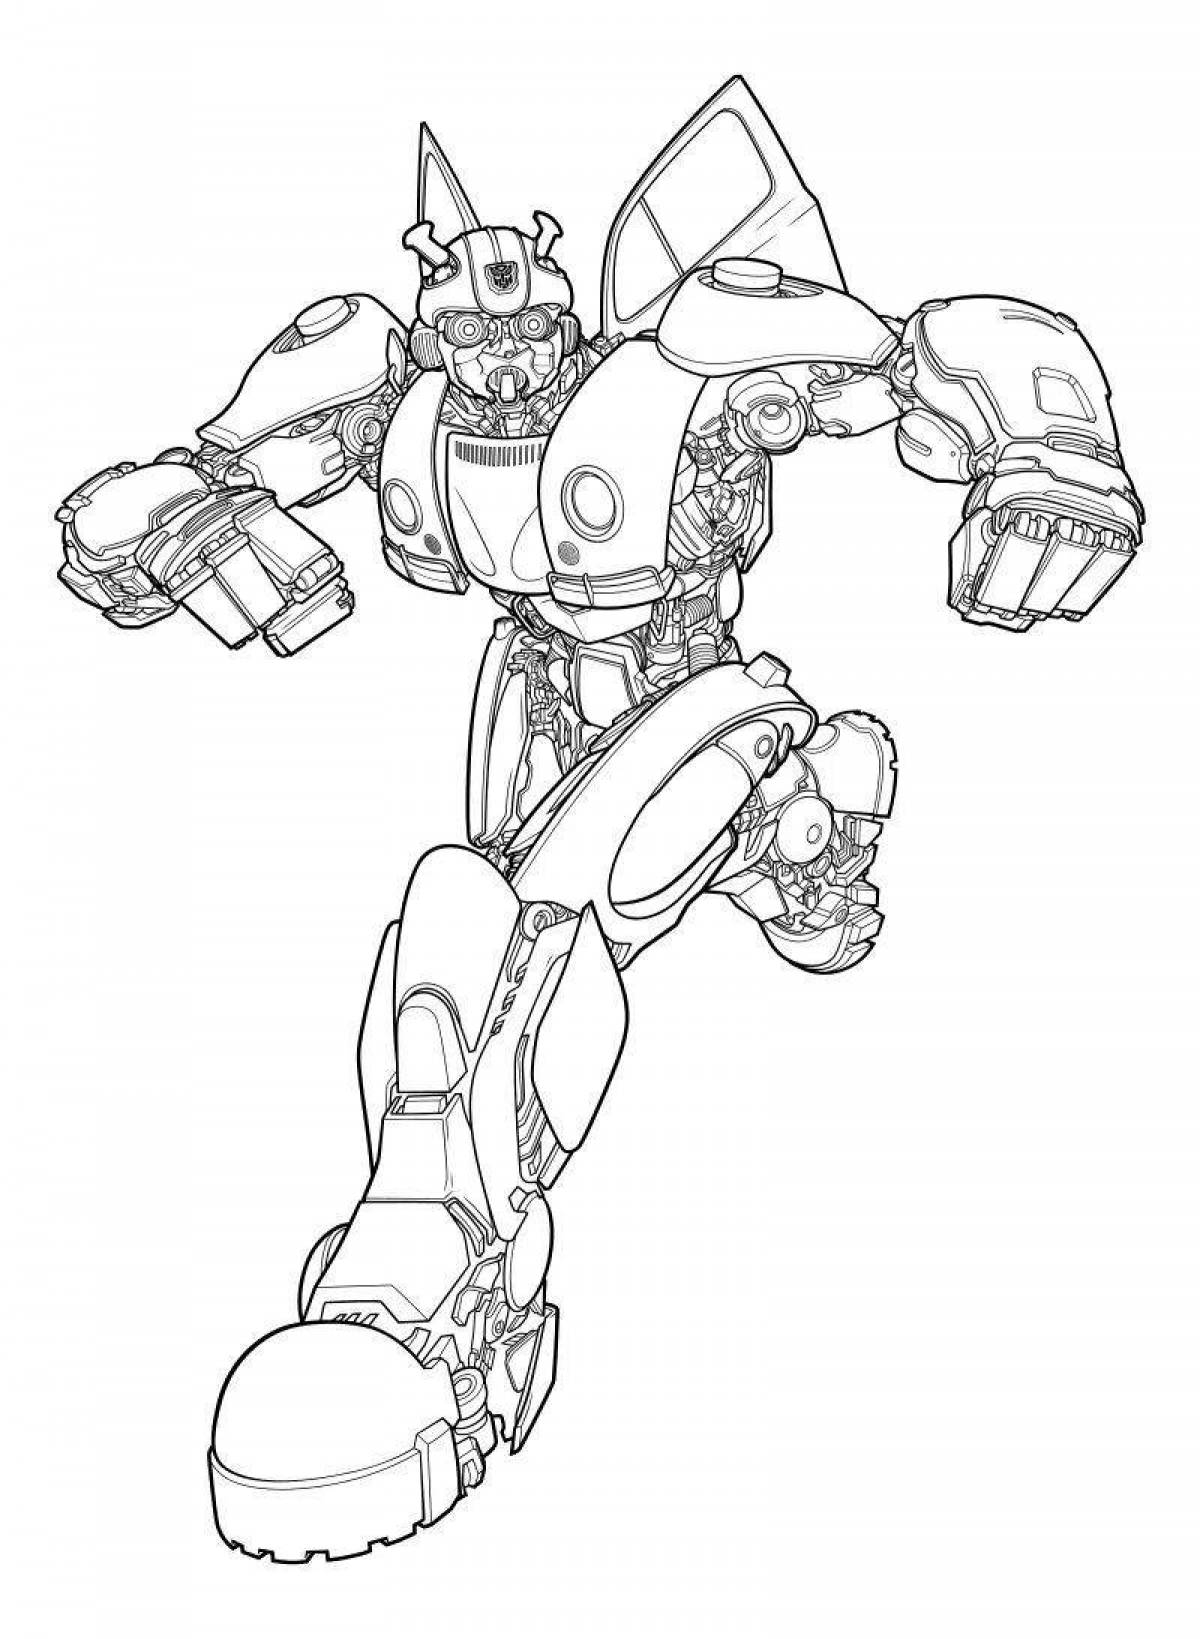 Gorgeous Transformers coloring page